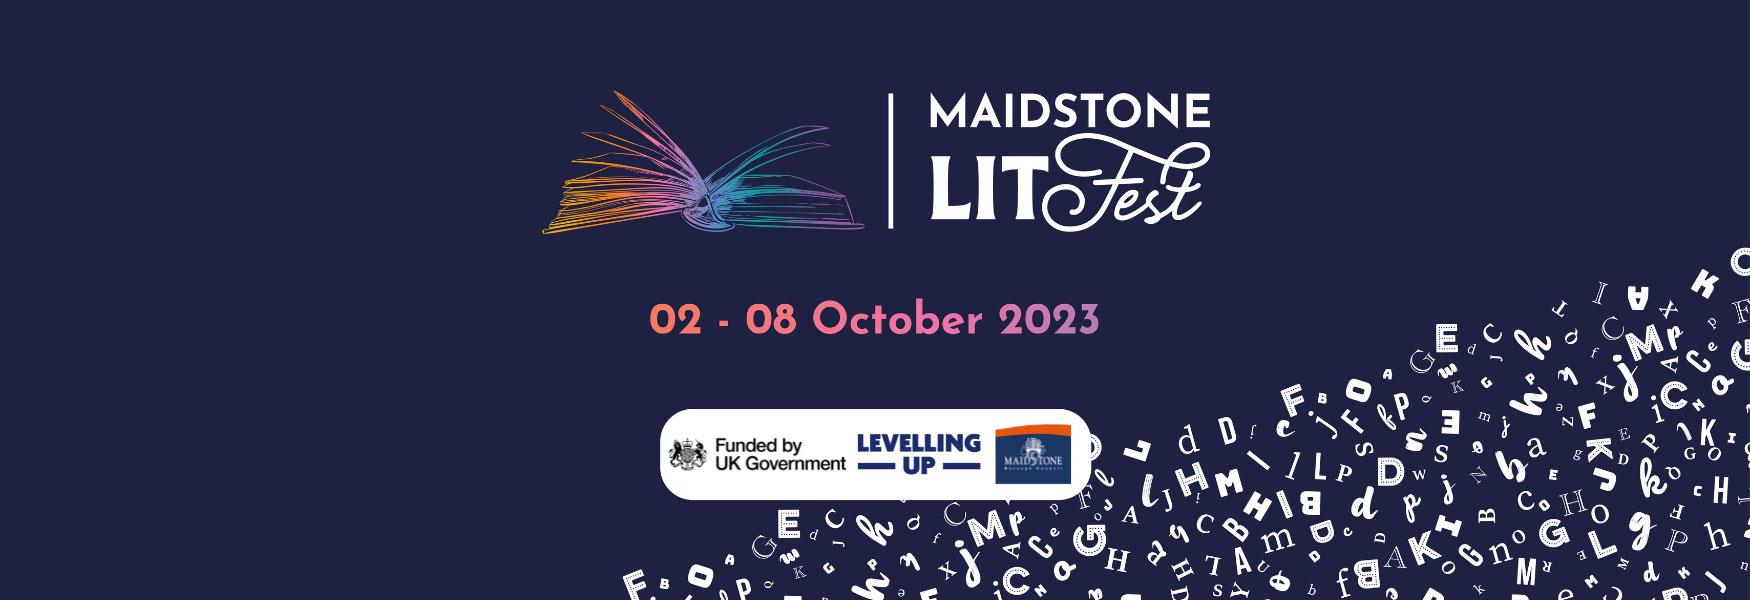 Maidstone LitFest Logo and Funding Logos (Funded by UK Government, Leveling Up and Maidstone Borough Council Logos)